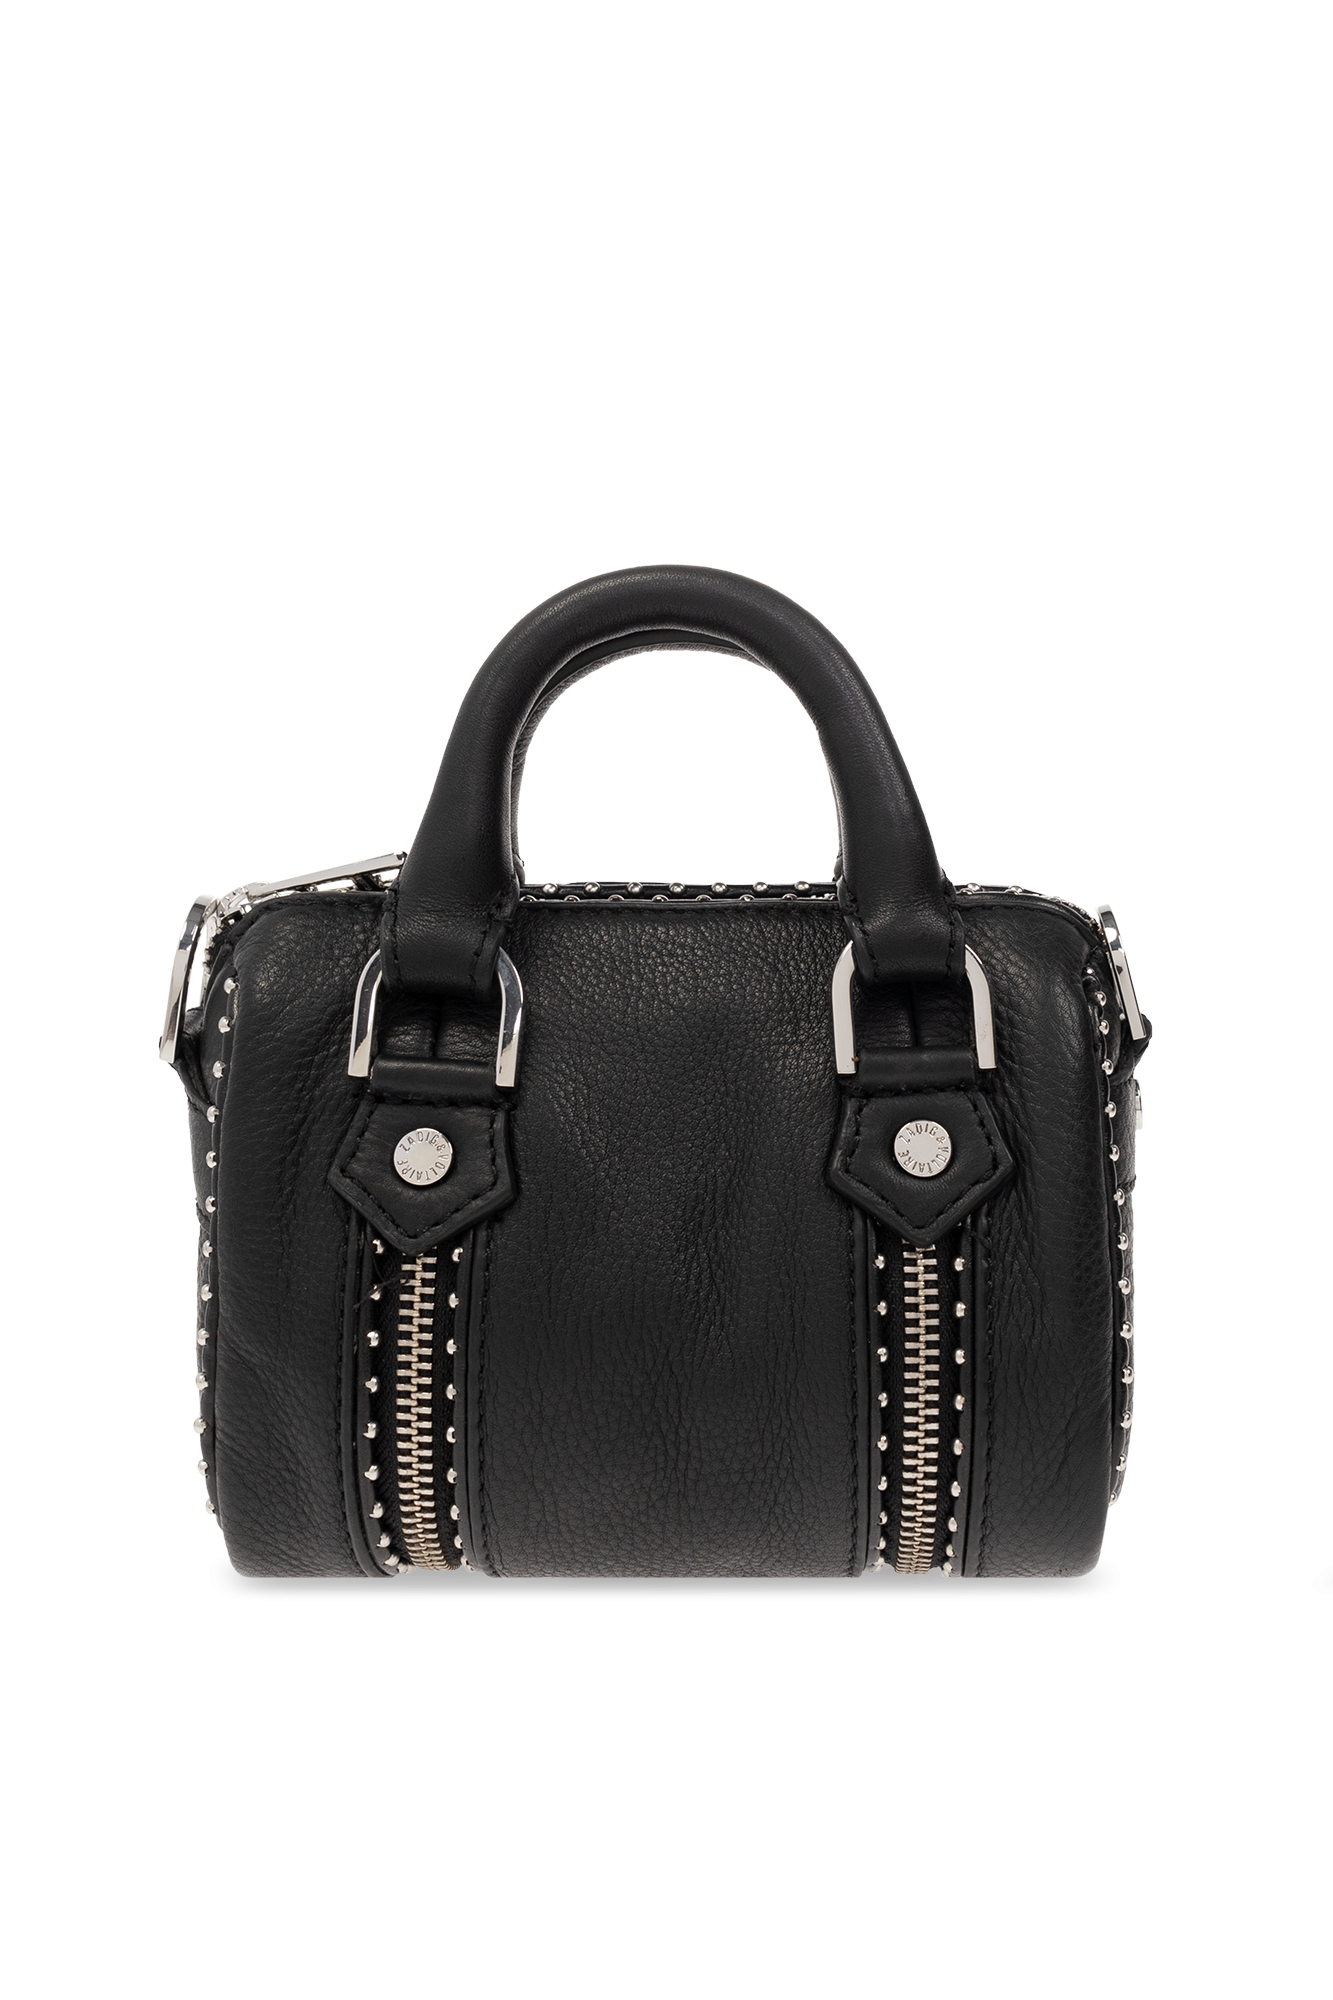 Zadig & Voltaire - Authenticated Sunny Handbag - Leather Black Plain for Women, Very Good Condition